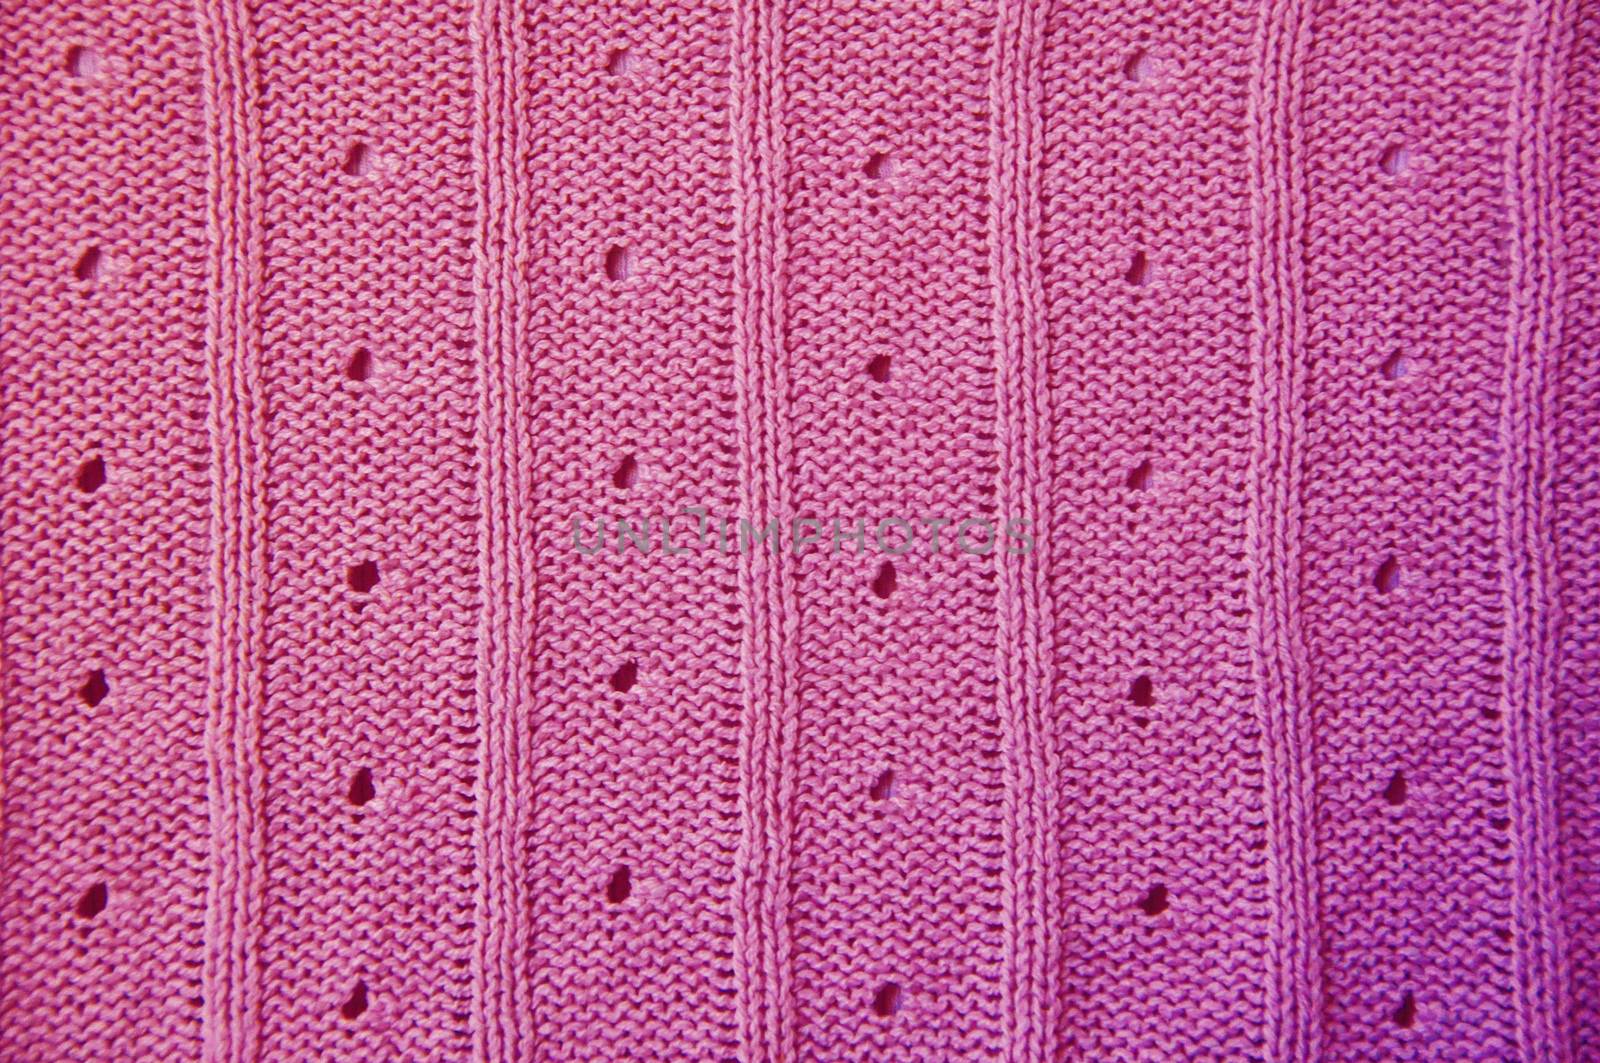 texture of cotton knitted fabric by AlessandraSuppo